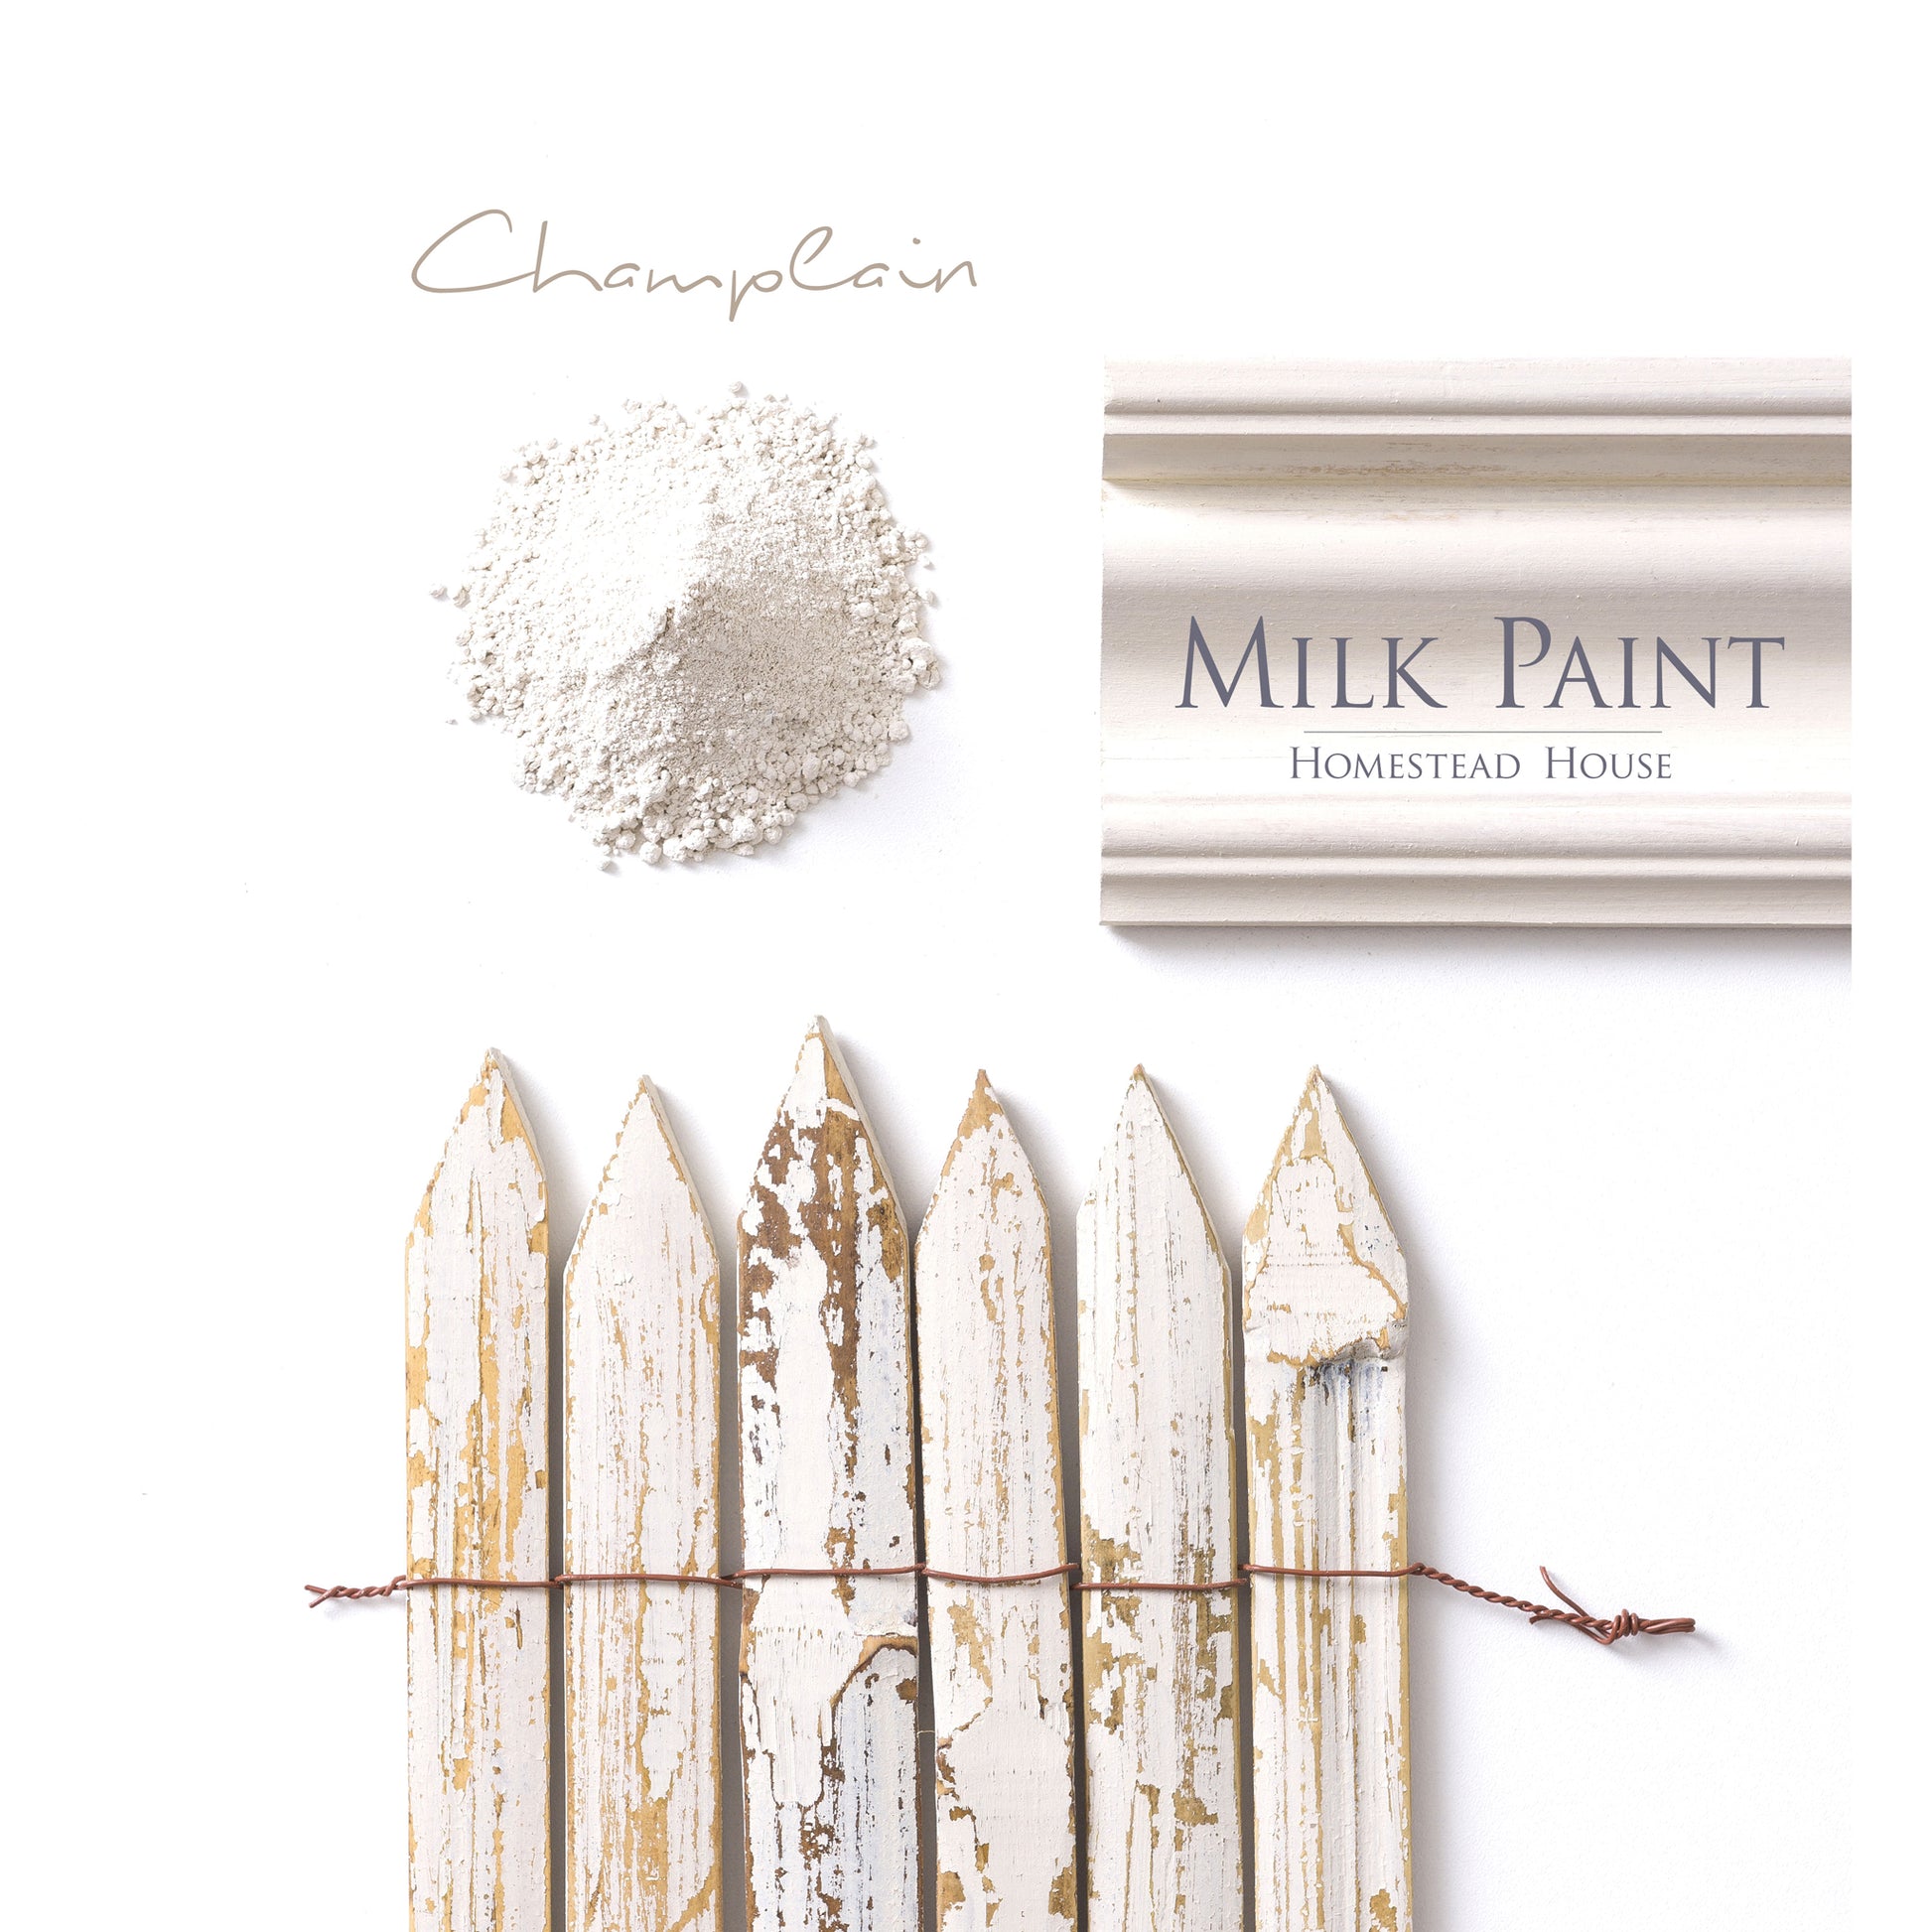 Milk Paint from Homestead House in Champlain, A perfect neutral ivory white with depth. | homesteadhouse.ca